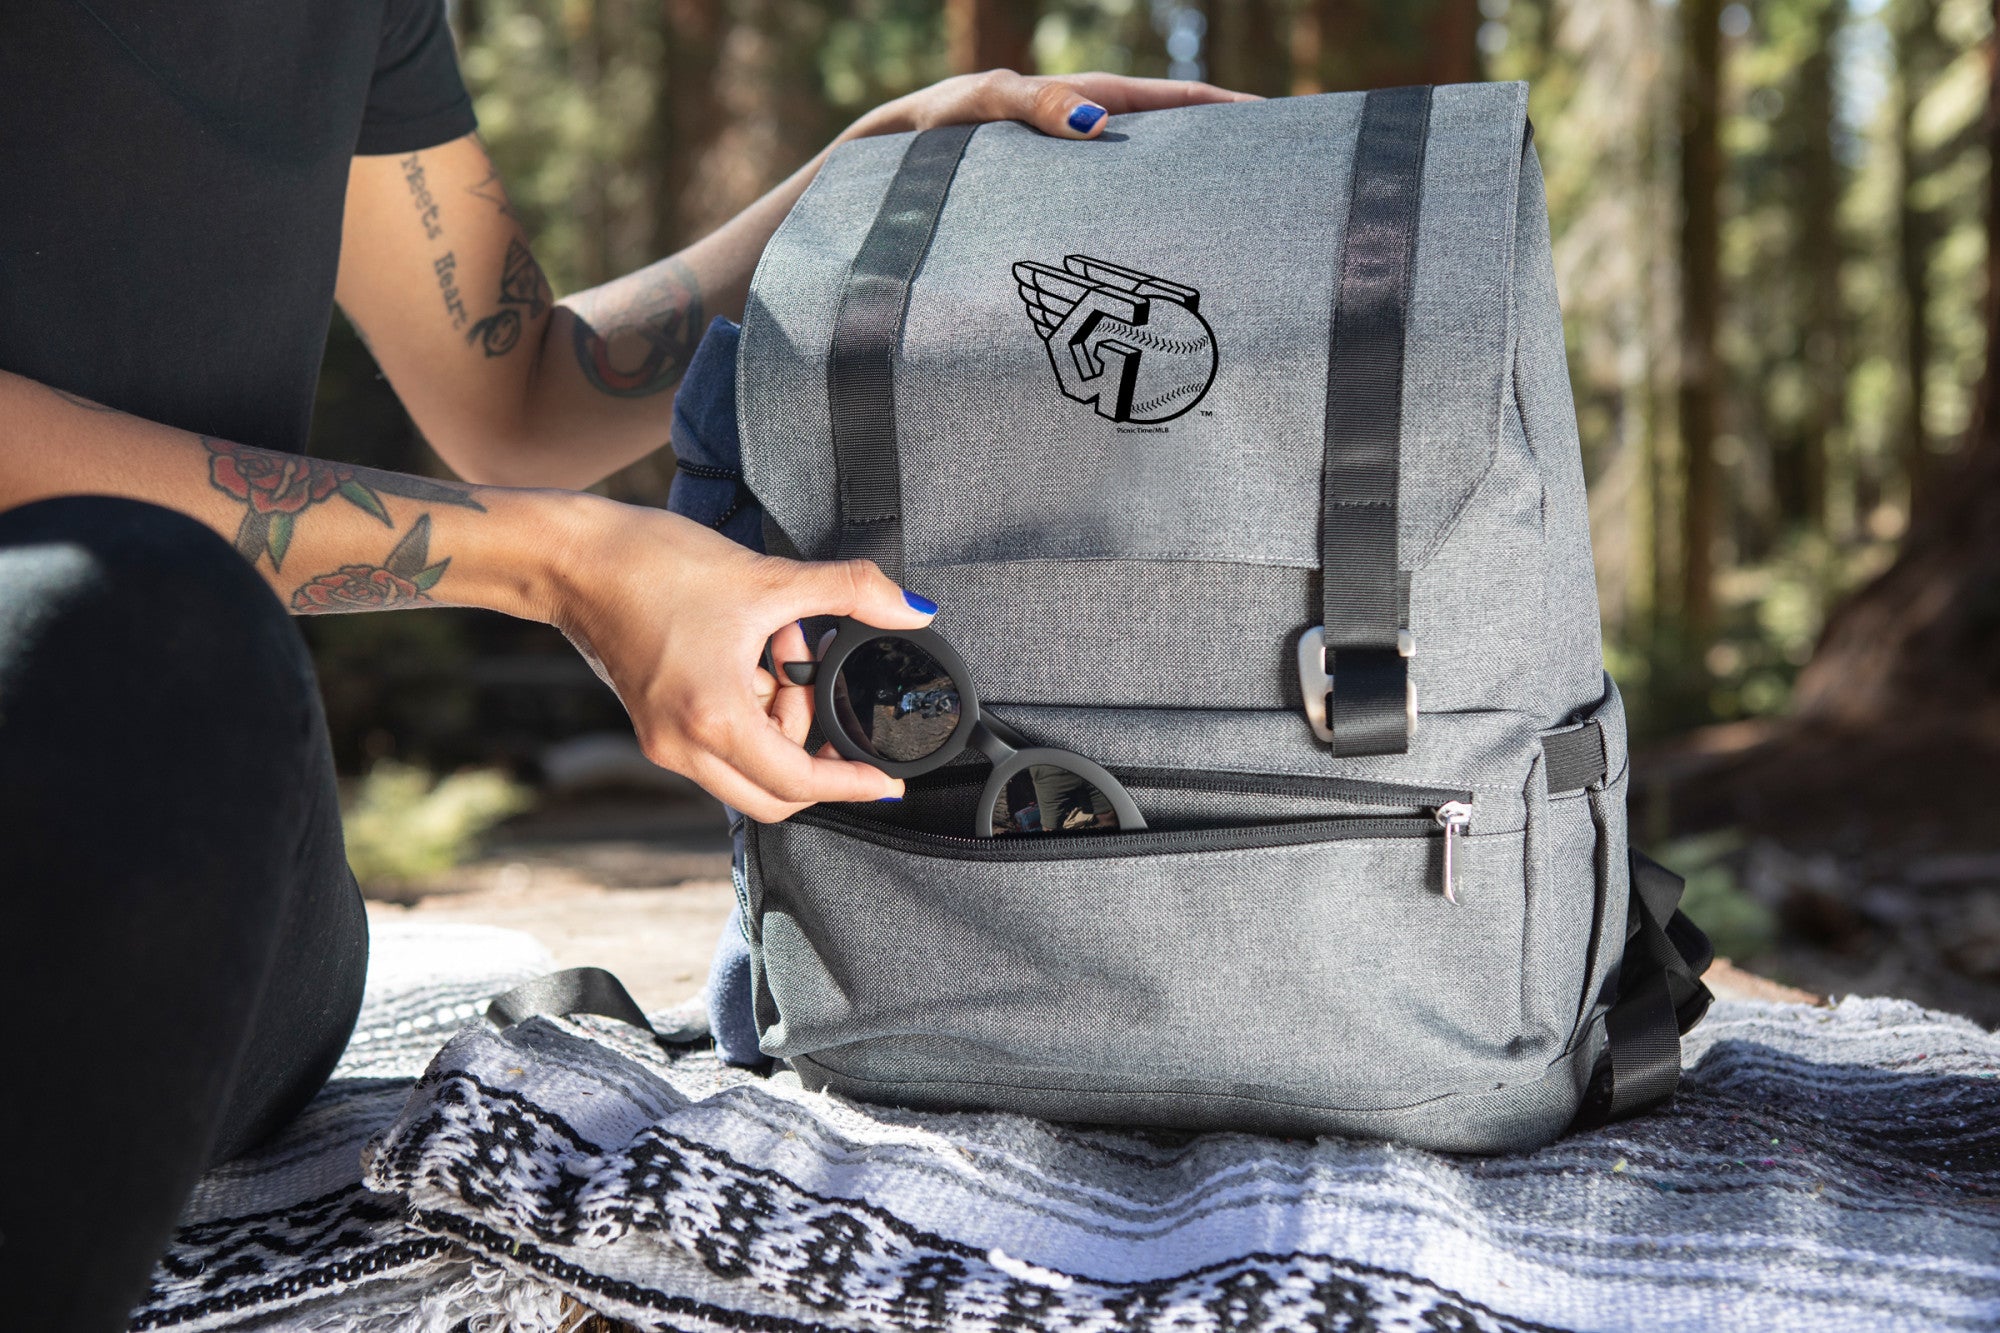 Cleveland Guardians - On The Go Traverse Backpack Cooler